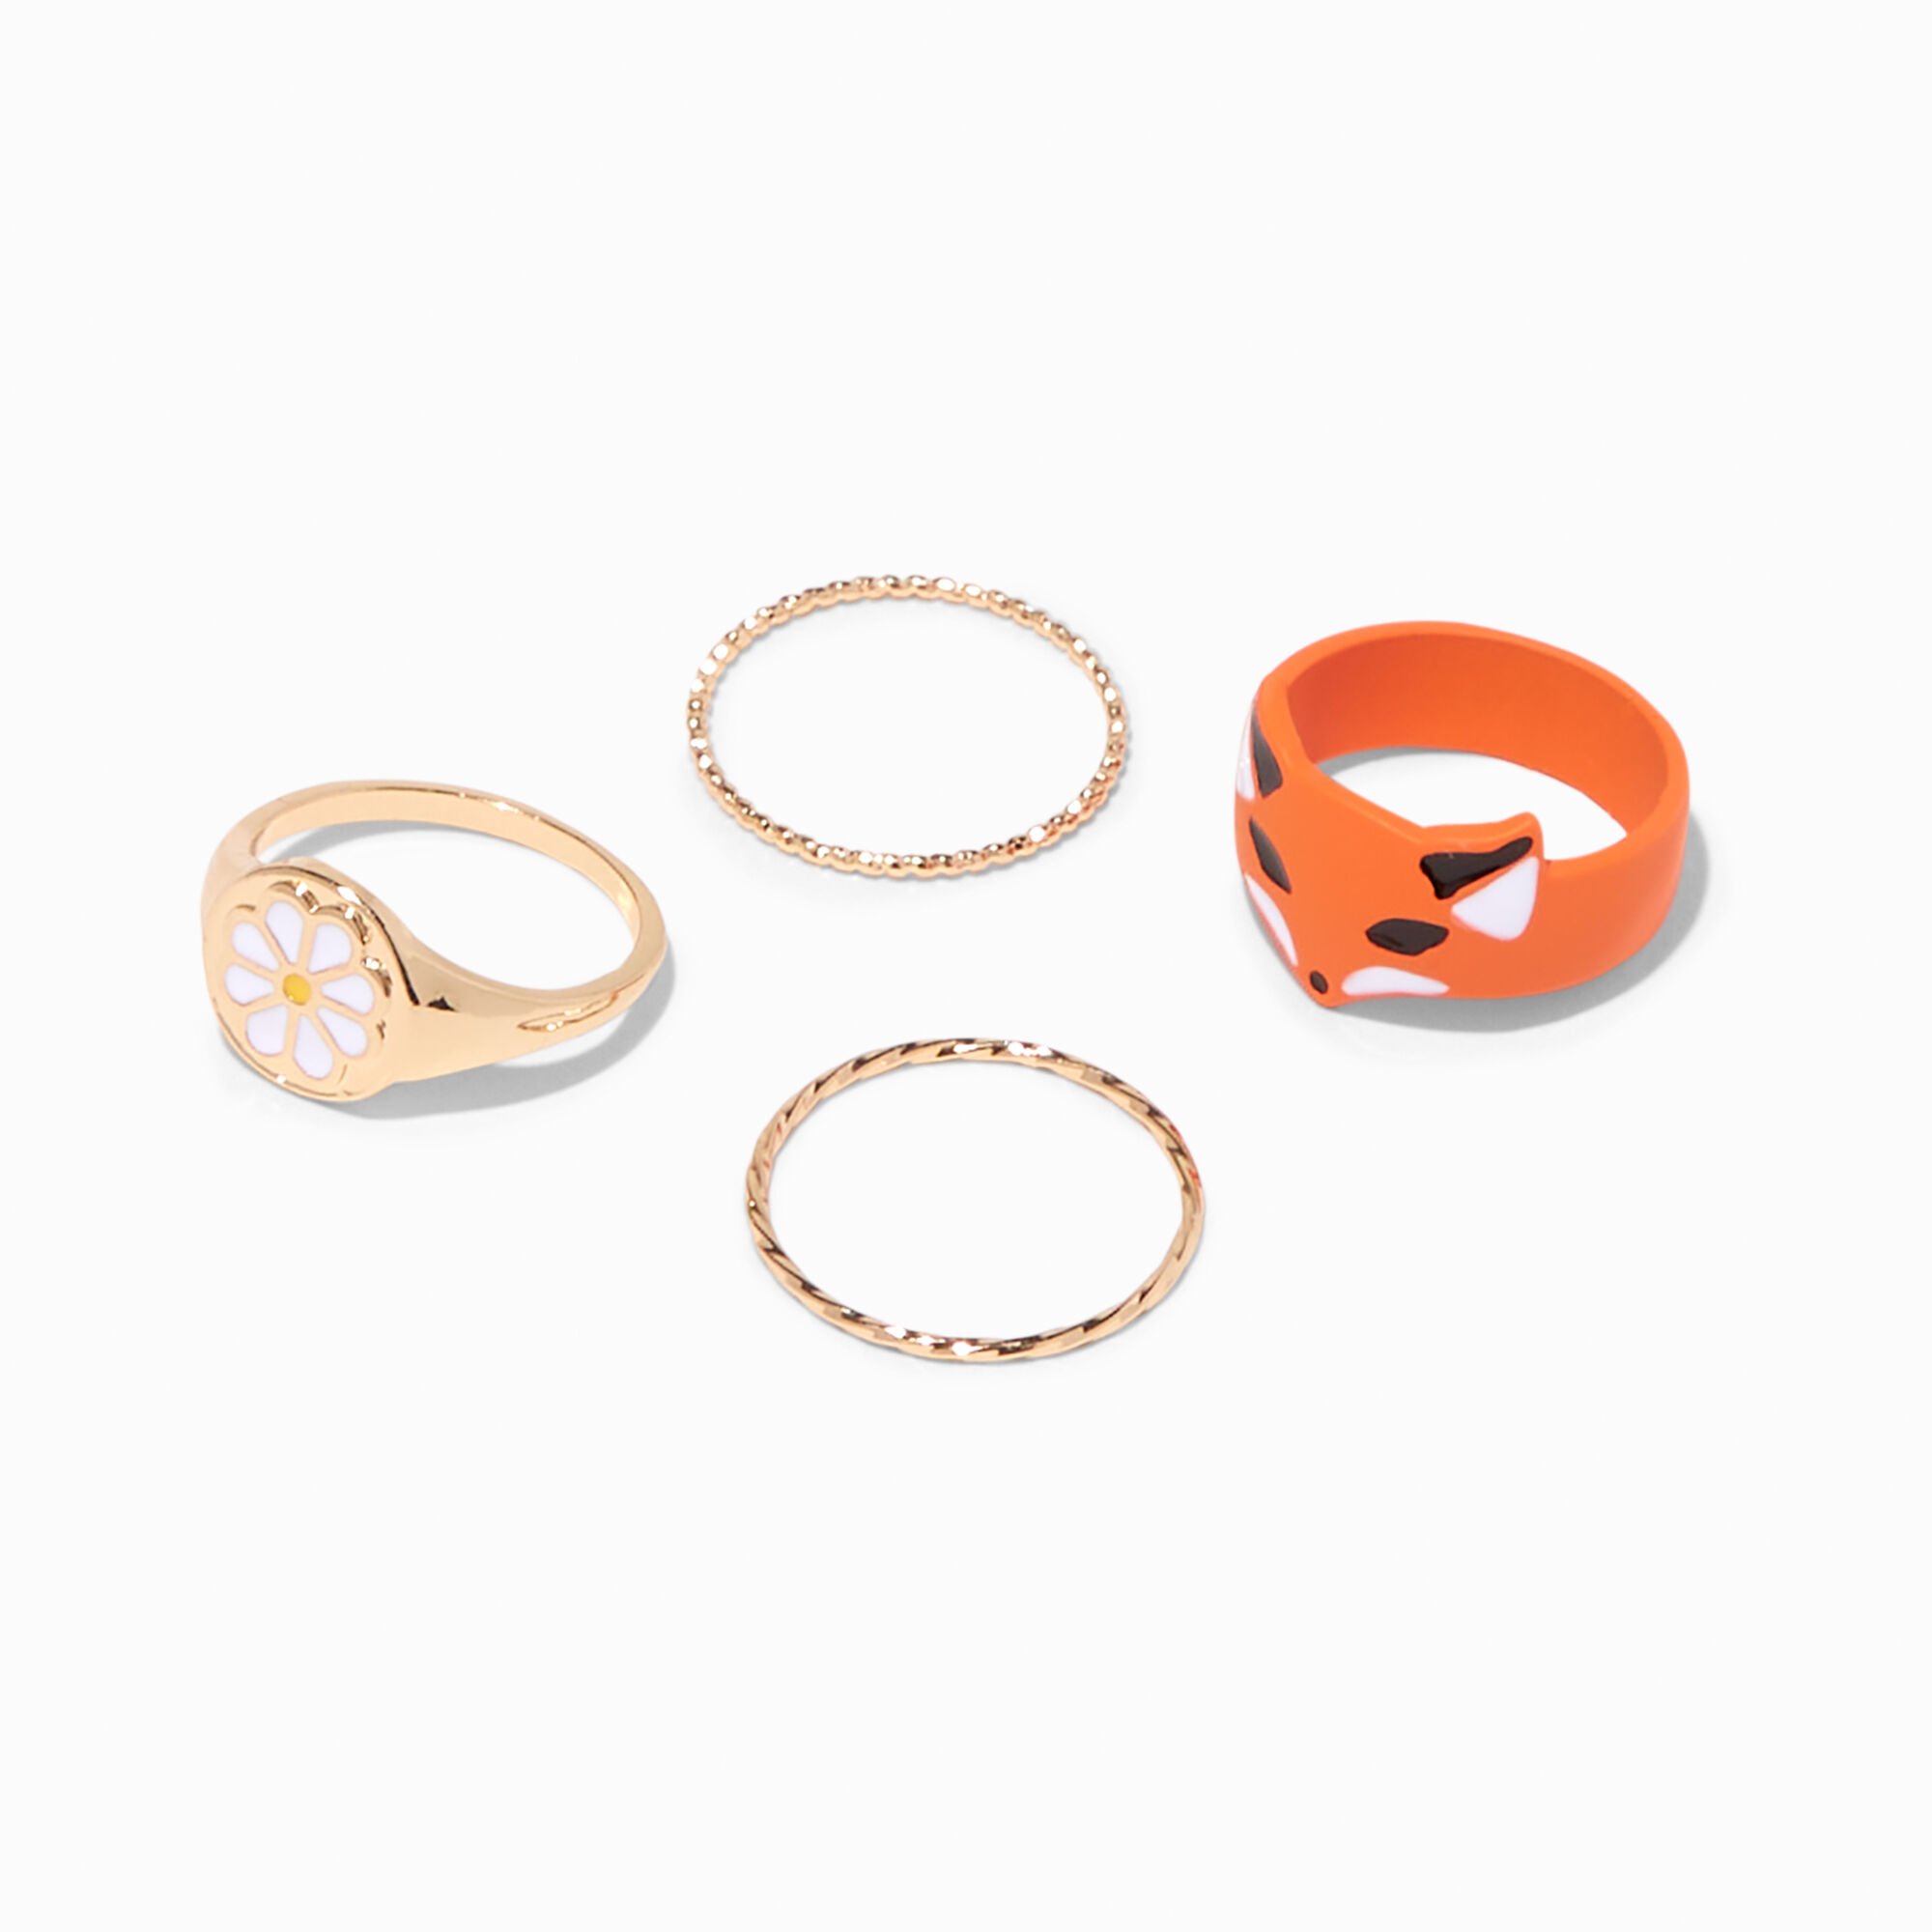 View Claires Fox White Daisy Gold Woven Band Ring Set 4 Pack Orange information